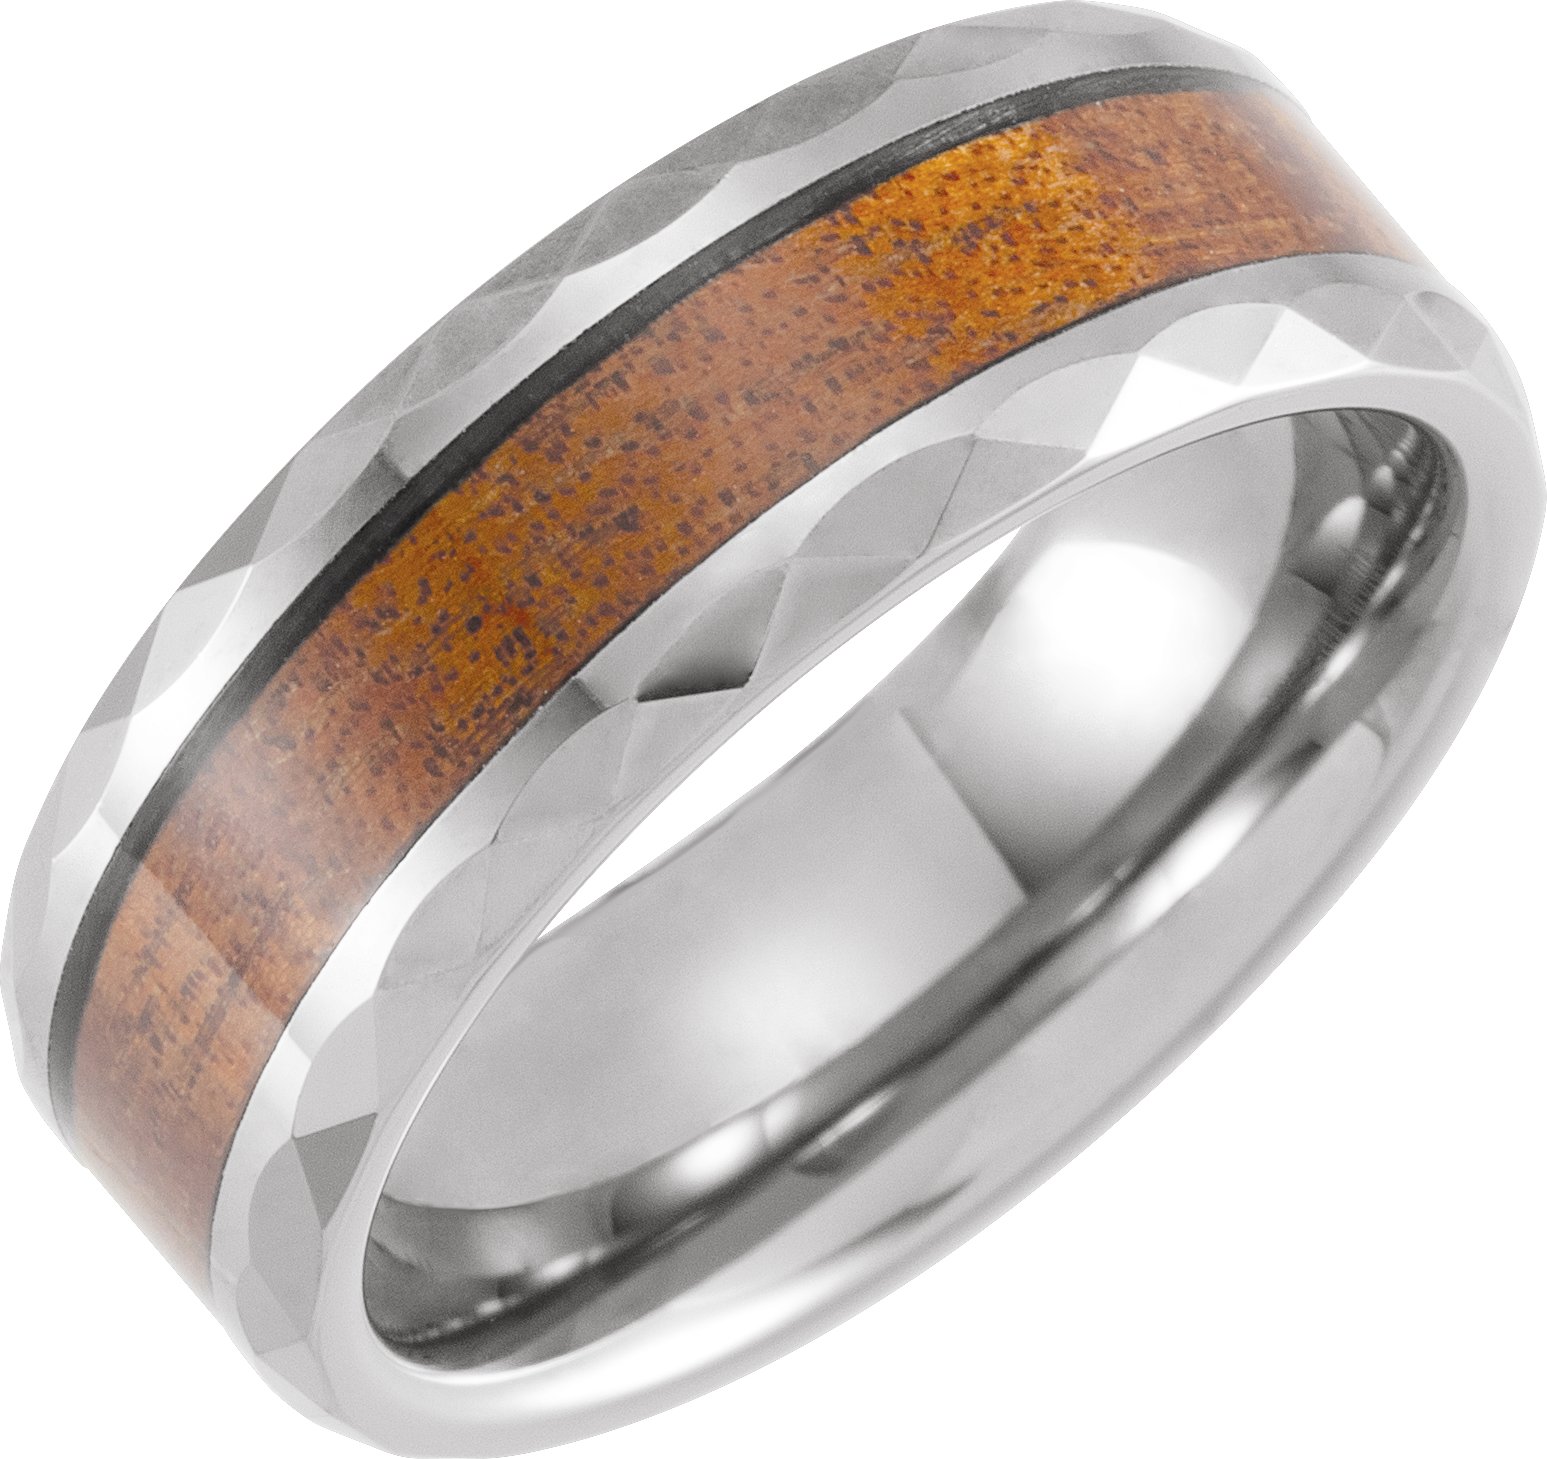 Tungsten 8 mm Beveled Band with Acacia Wood Inlay Size 13.5